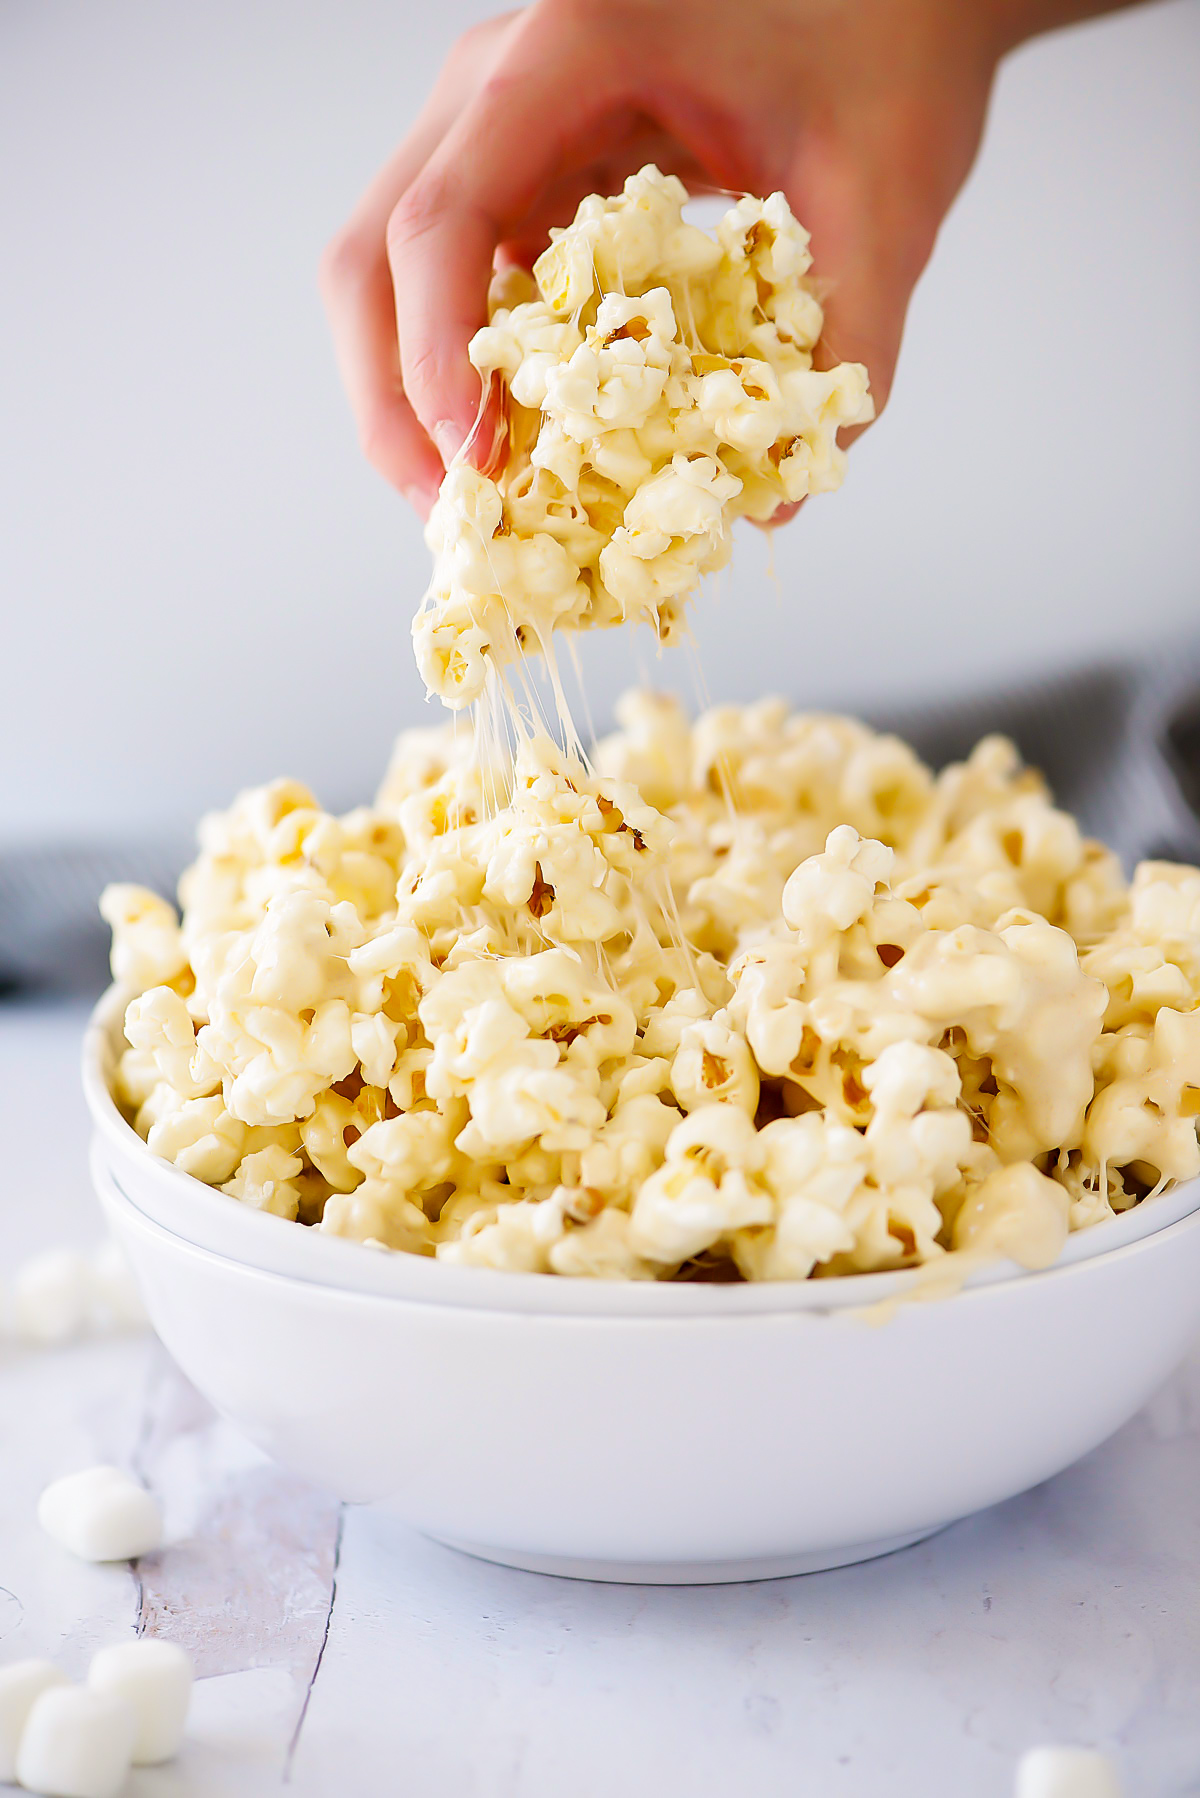 Marshmallow popcorn is warm popcorn covered in a gooey mixture of brown sugar, butter and marshmallows. Life-in-the-Lofthouse.com